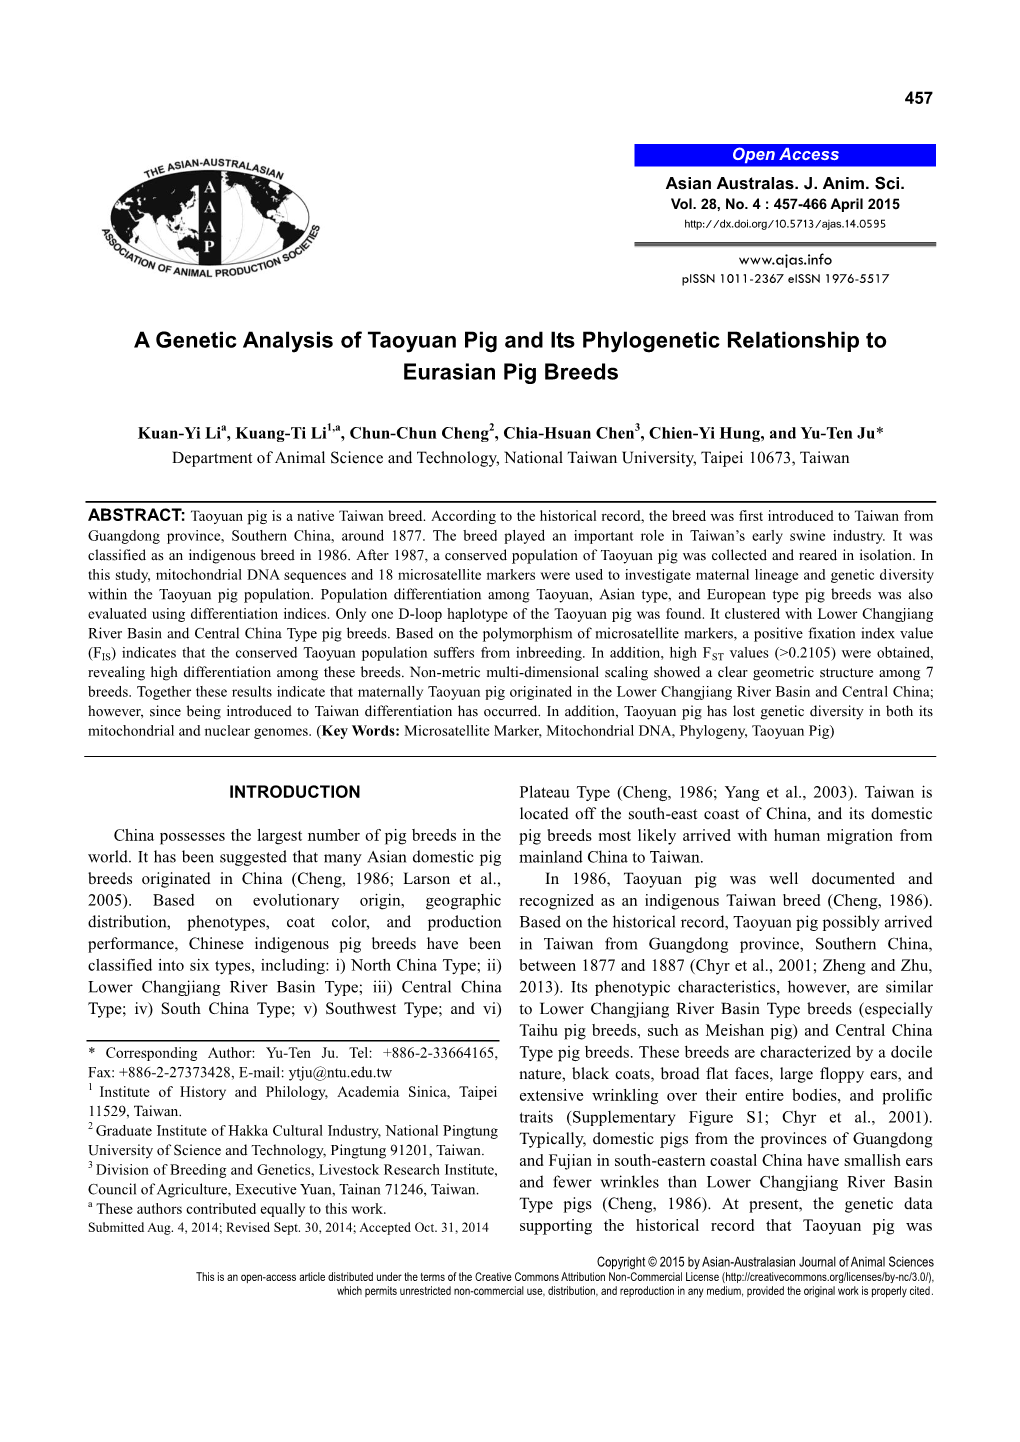 A Genetic Analysis of Taoyuan Pig and Its Phylogenetic Relationship to Eurasian Pig Breeds